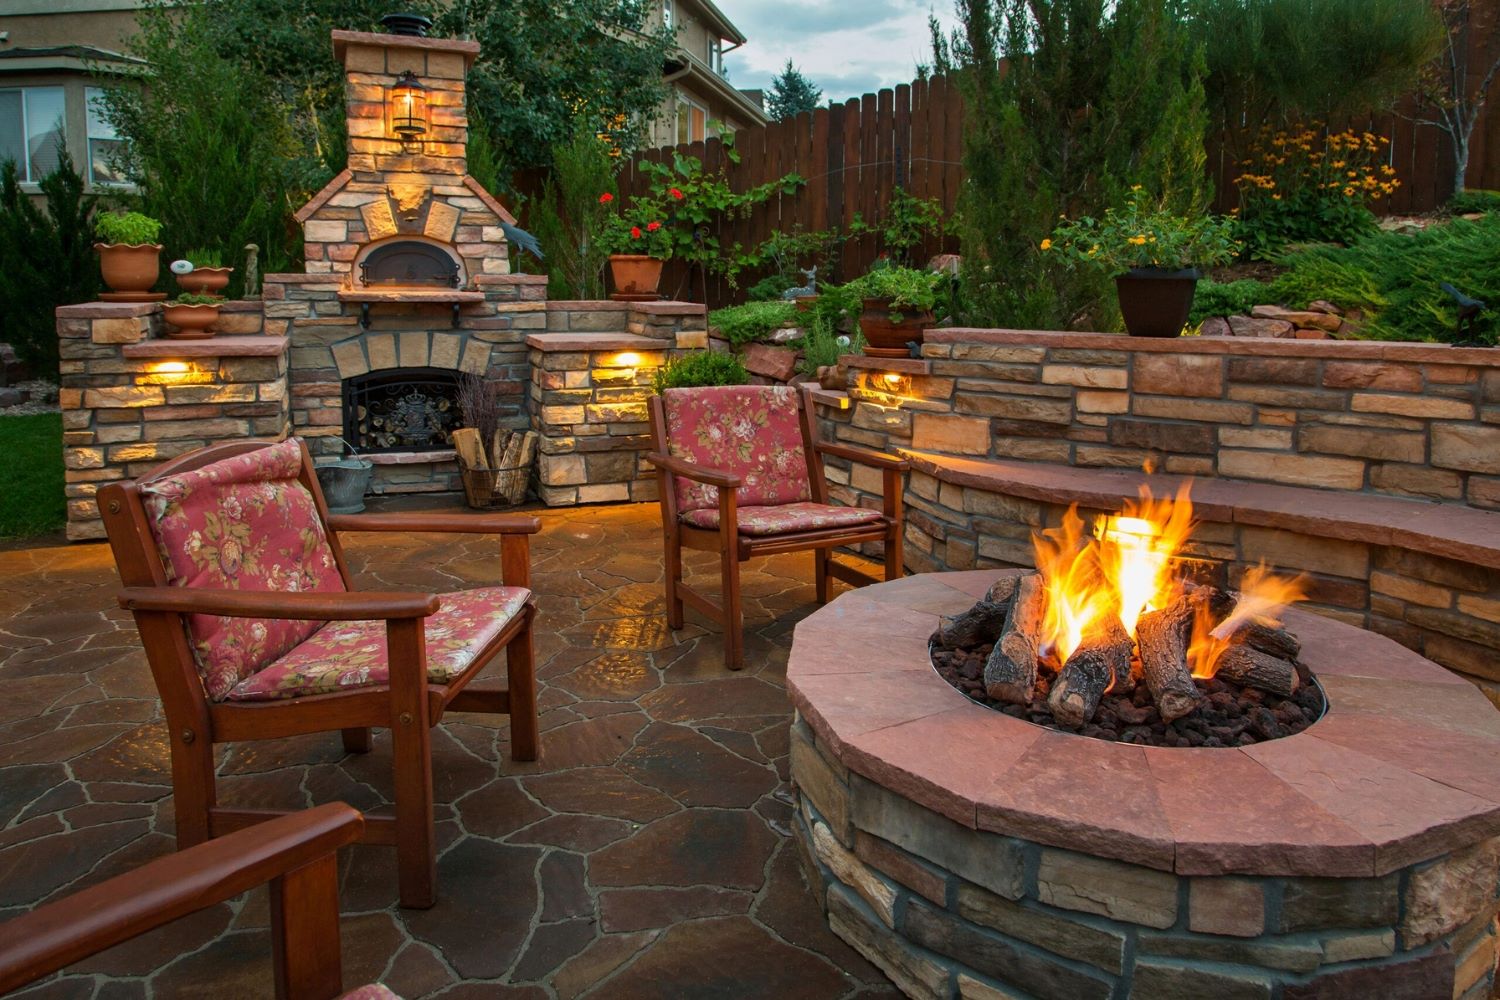 Check Out The Most Amazing Fire Pit For Your Landscaping Needs!